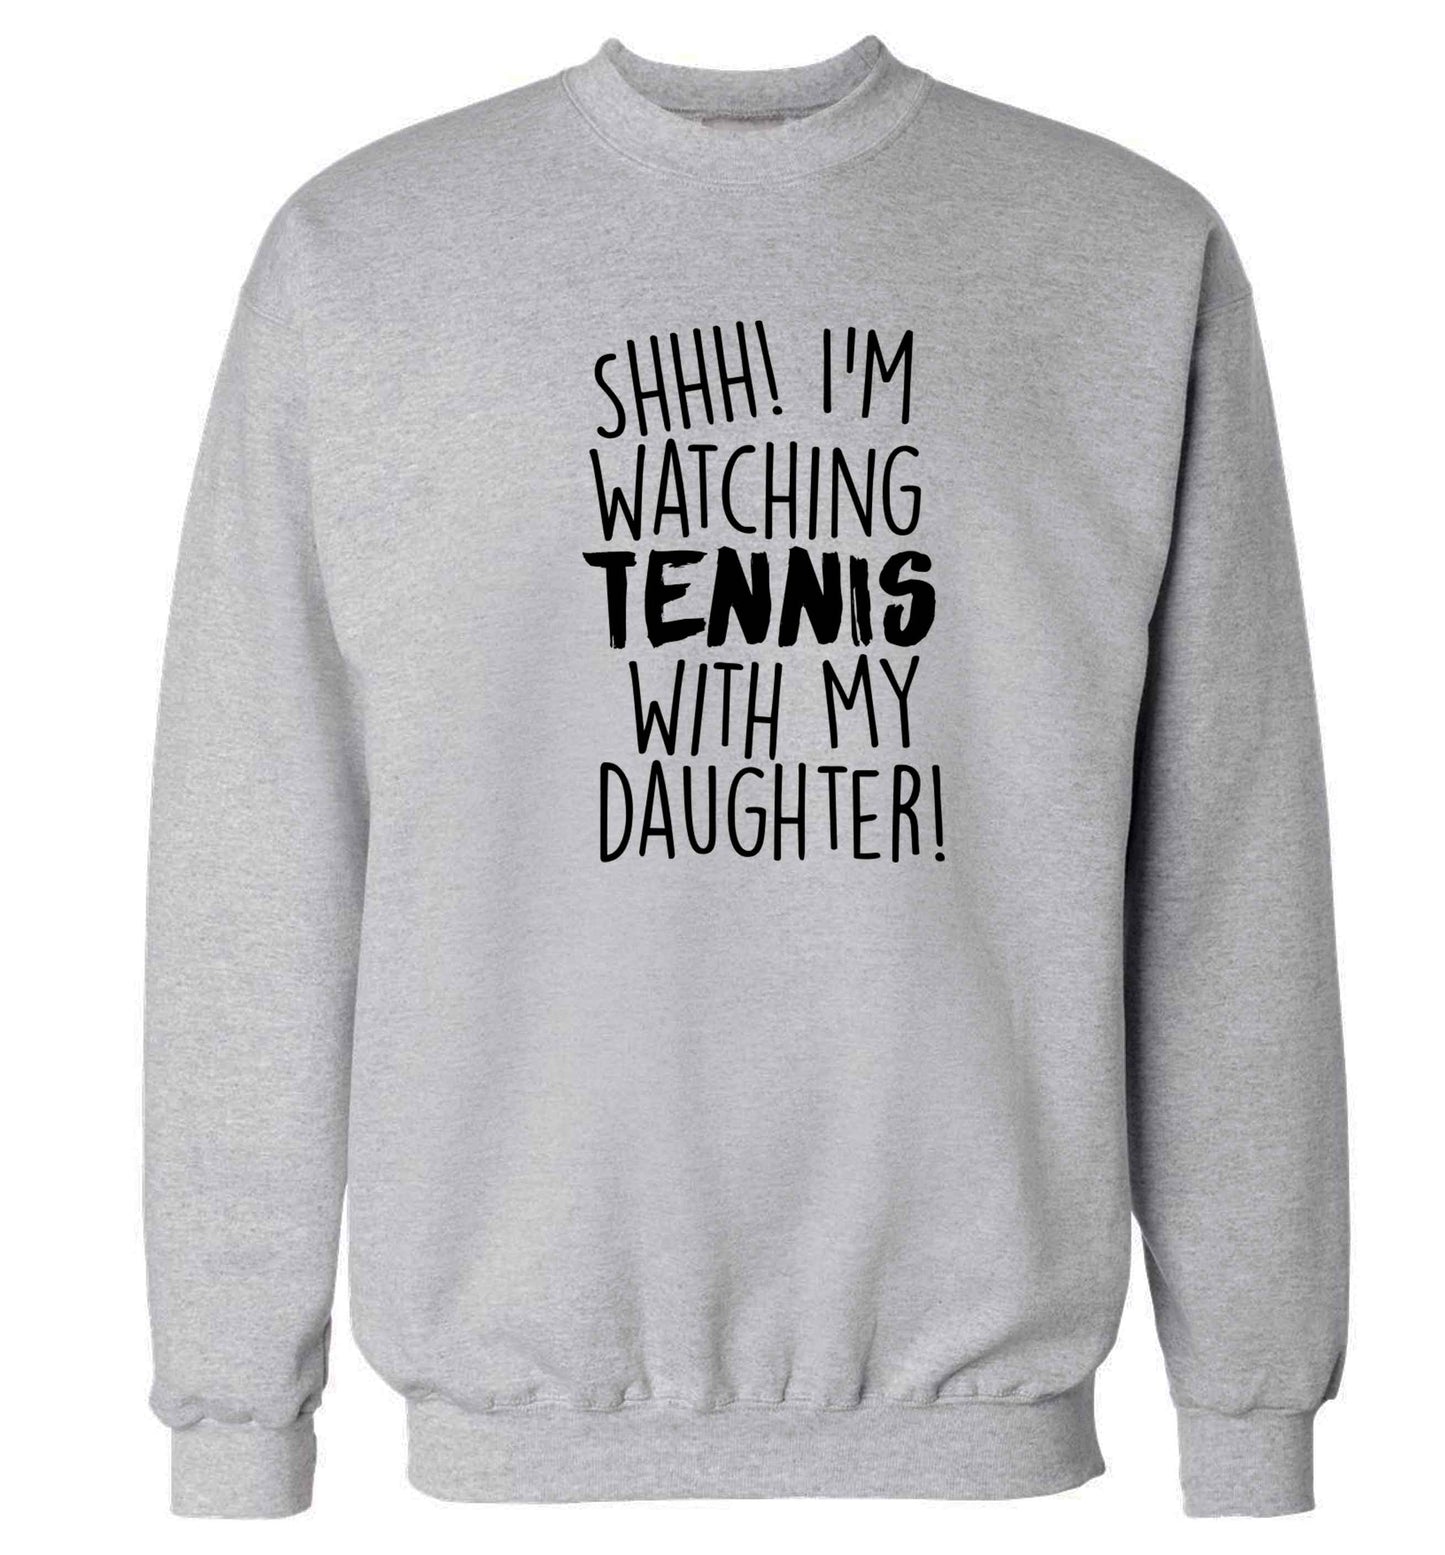 Shh! I'm watching tennis with my daughter! Adult's unisex grey Sweater 2XL